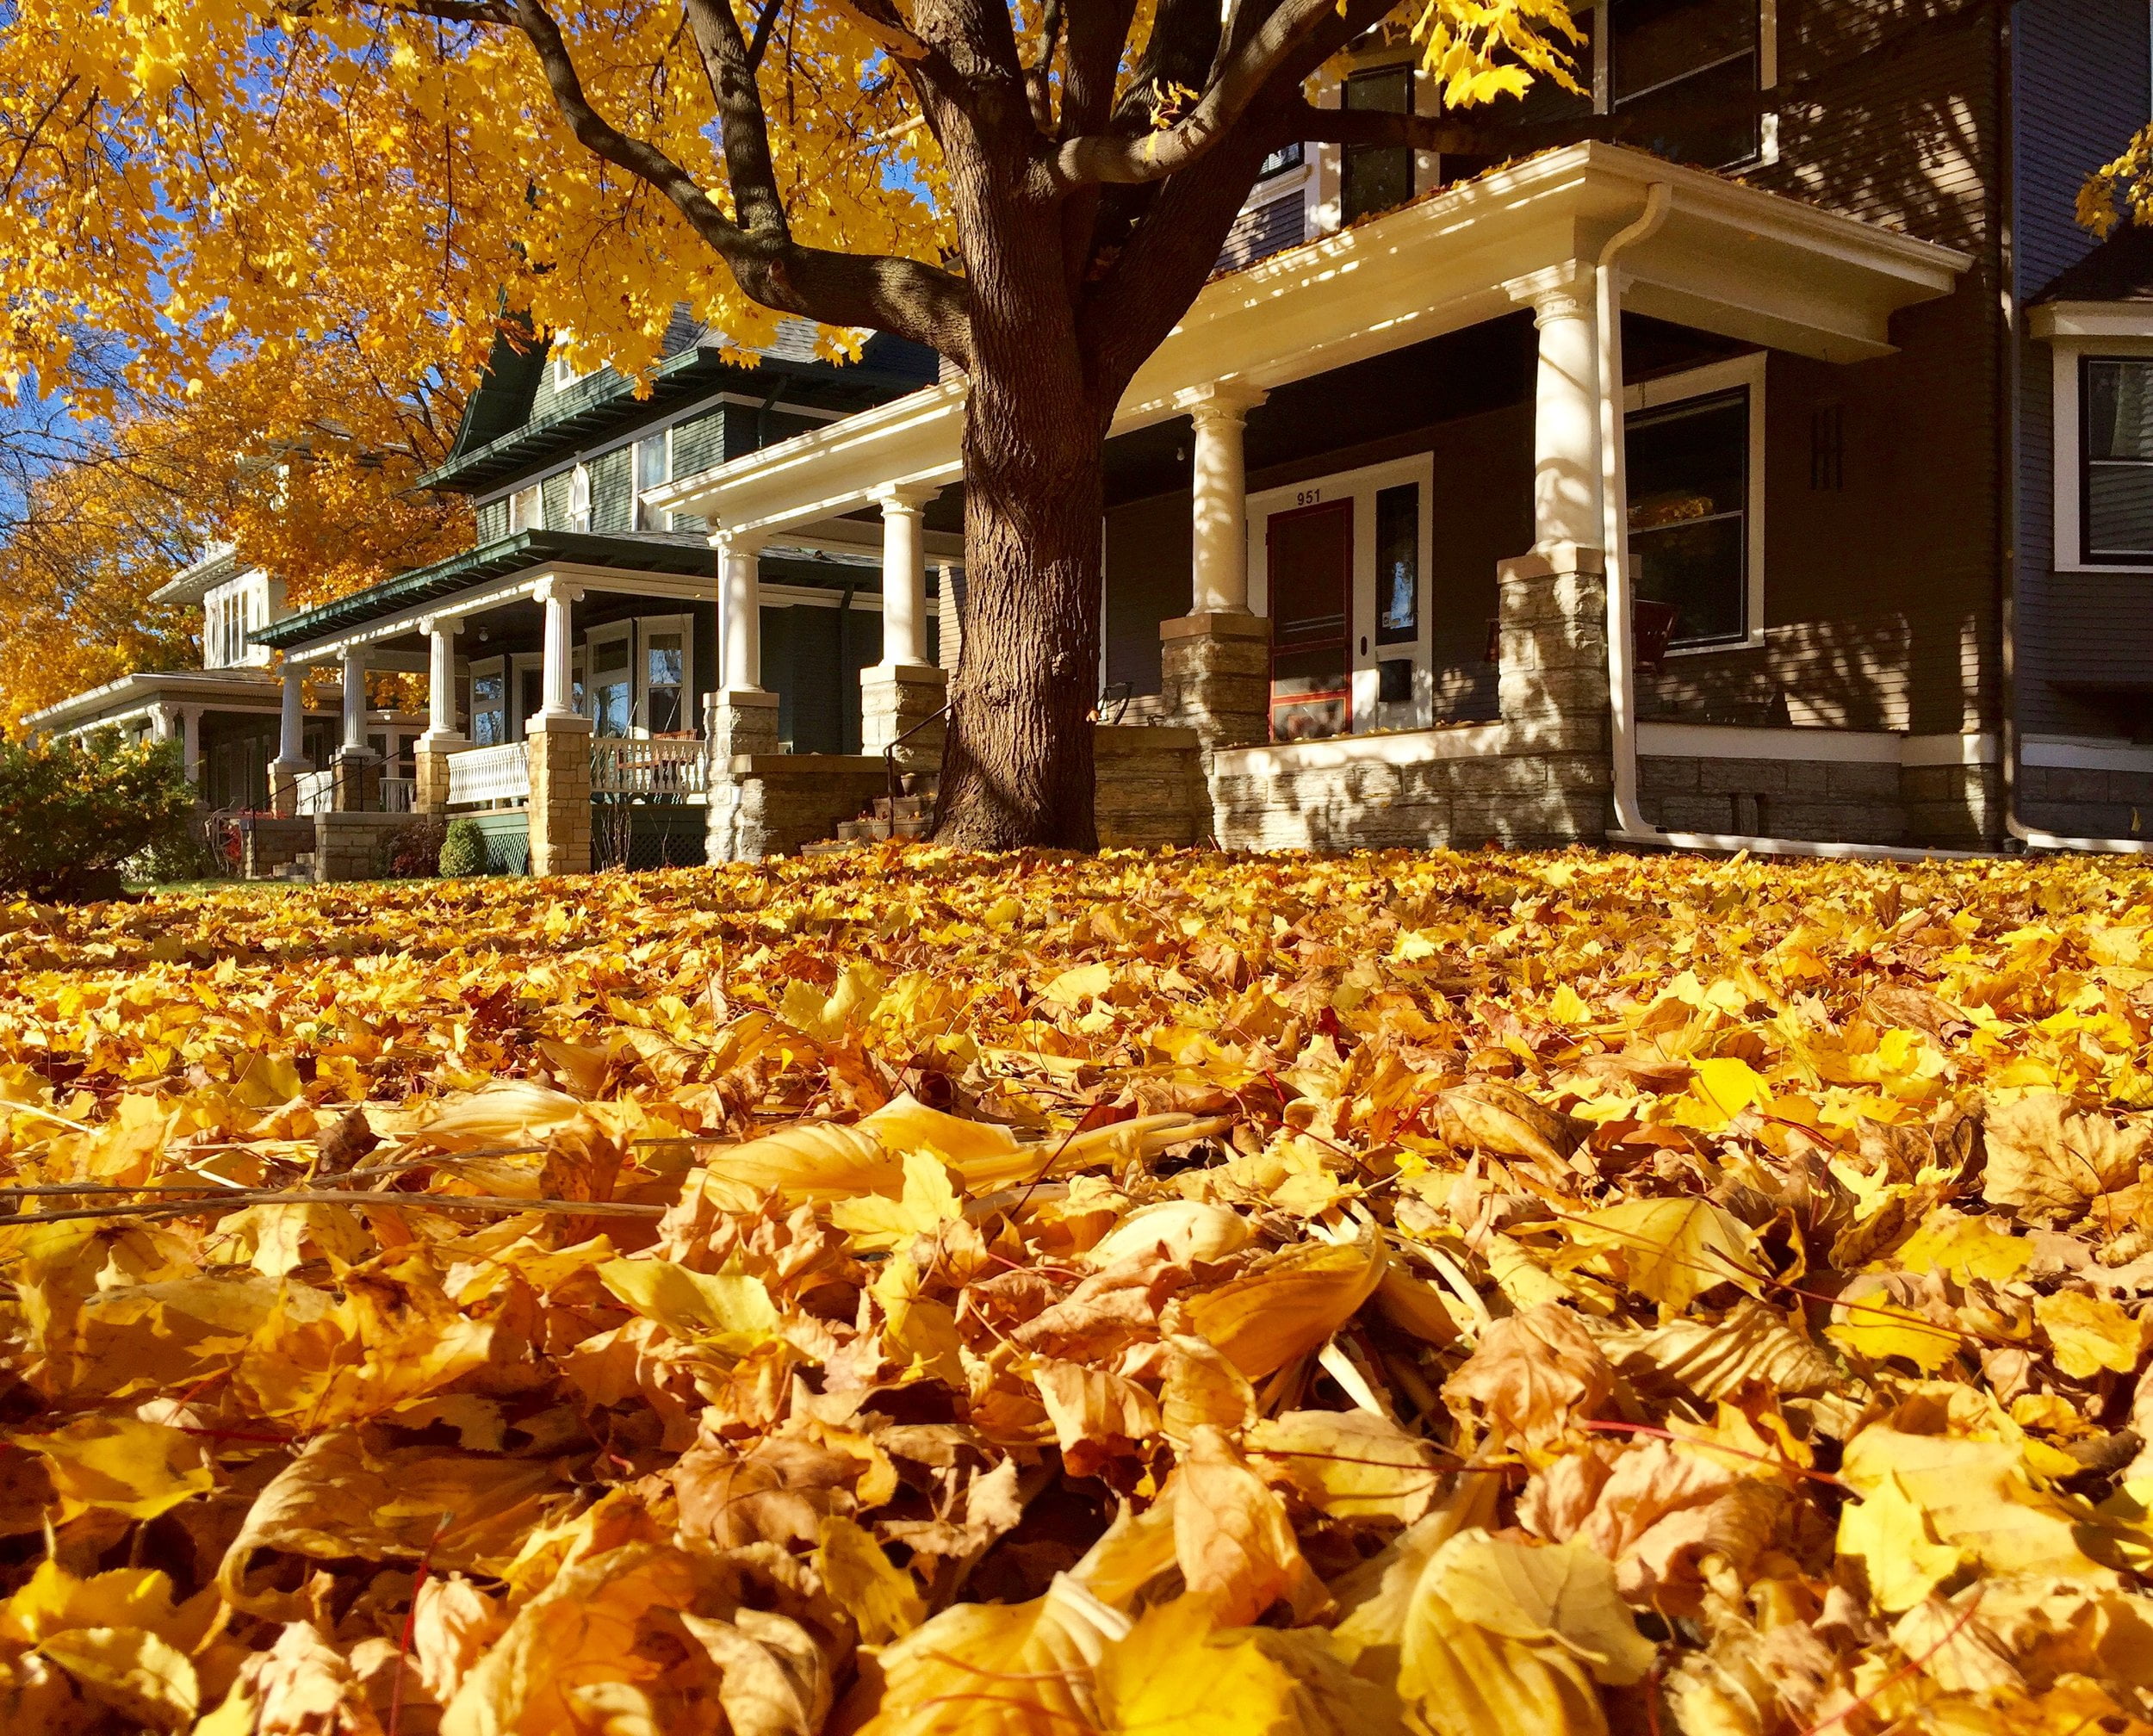 Fallhousingmarket With Autumn Here, What Can We Expect The Real Estate Market To Do?